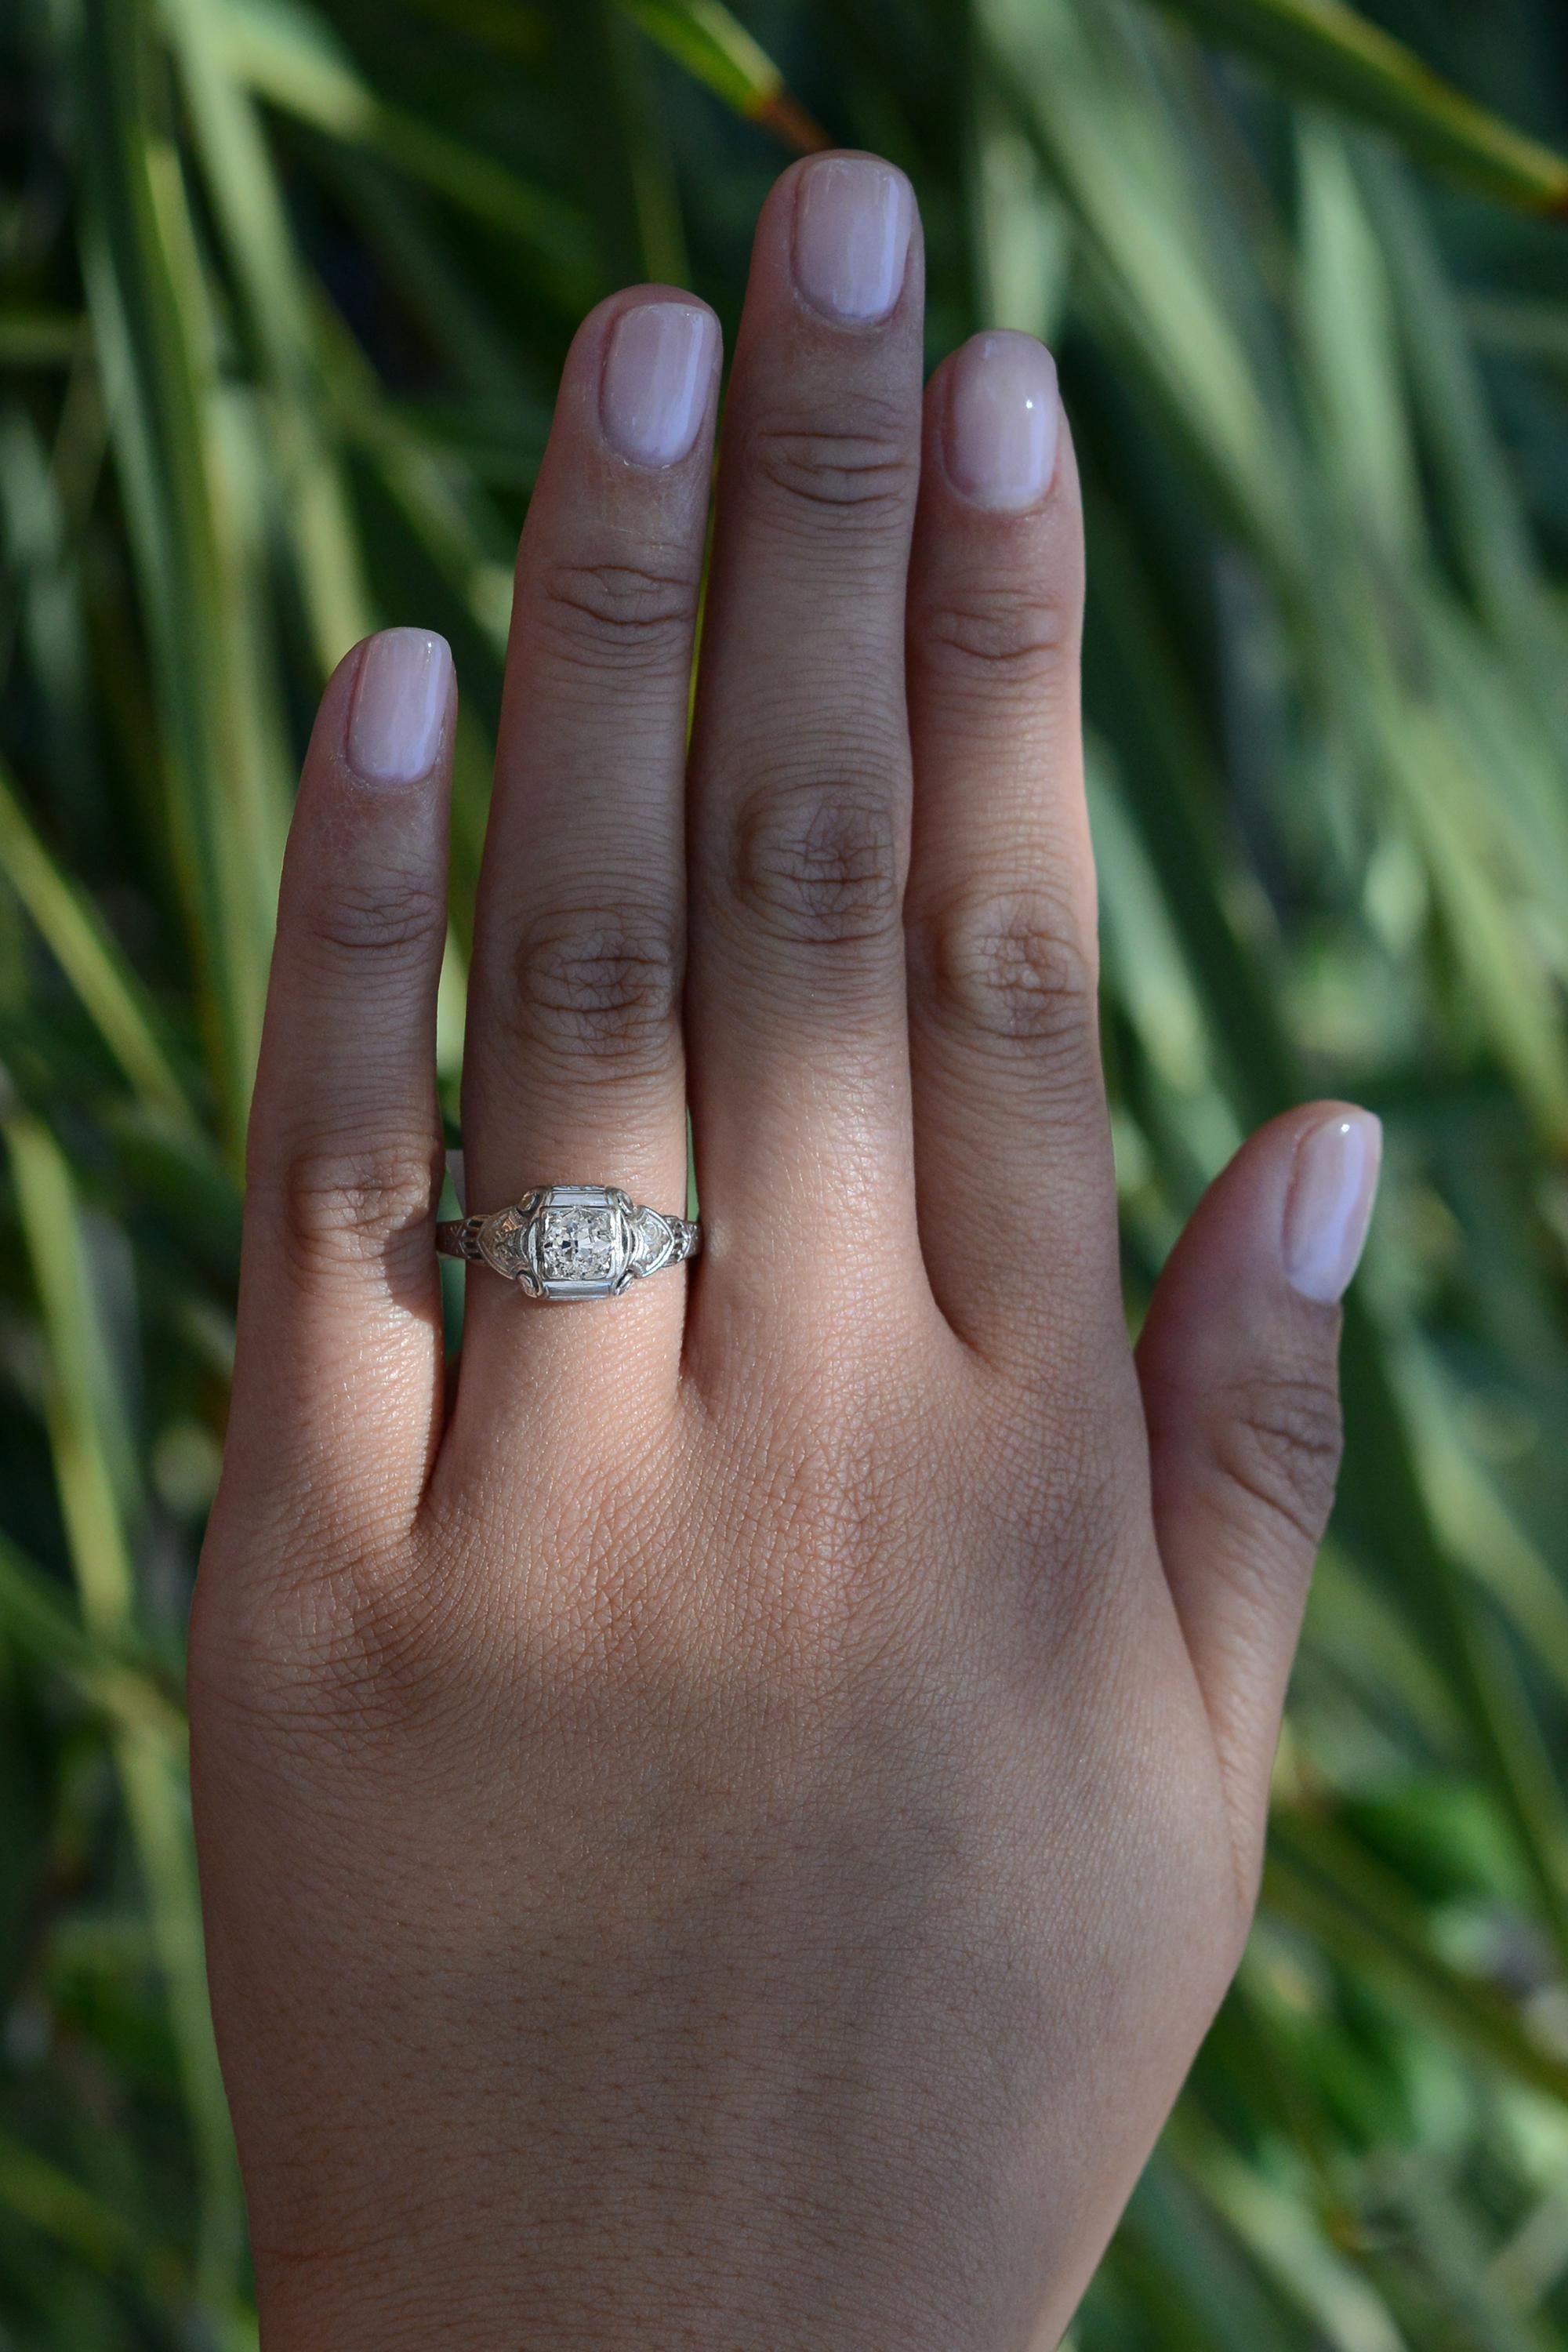 A vintage, affordable Art Deco engagement ring, a 1920s antique heirloom; ideal for that momentous proposal. Boasting a sparkling, 1/3 carat old European diamond, the near colorless gem presented in a hand engraved mount. Handcrafted with 18 karat